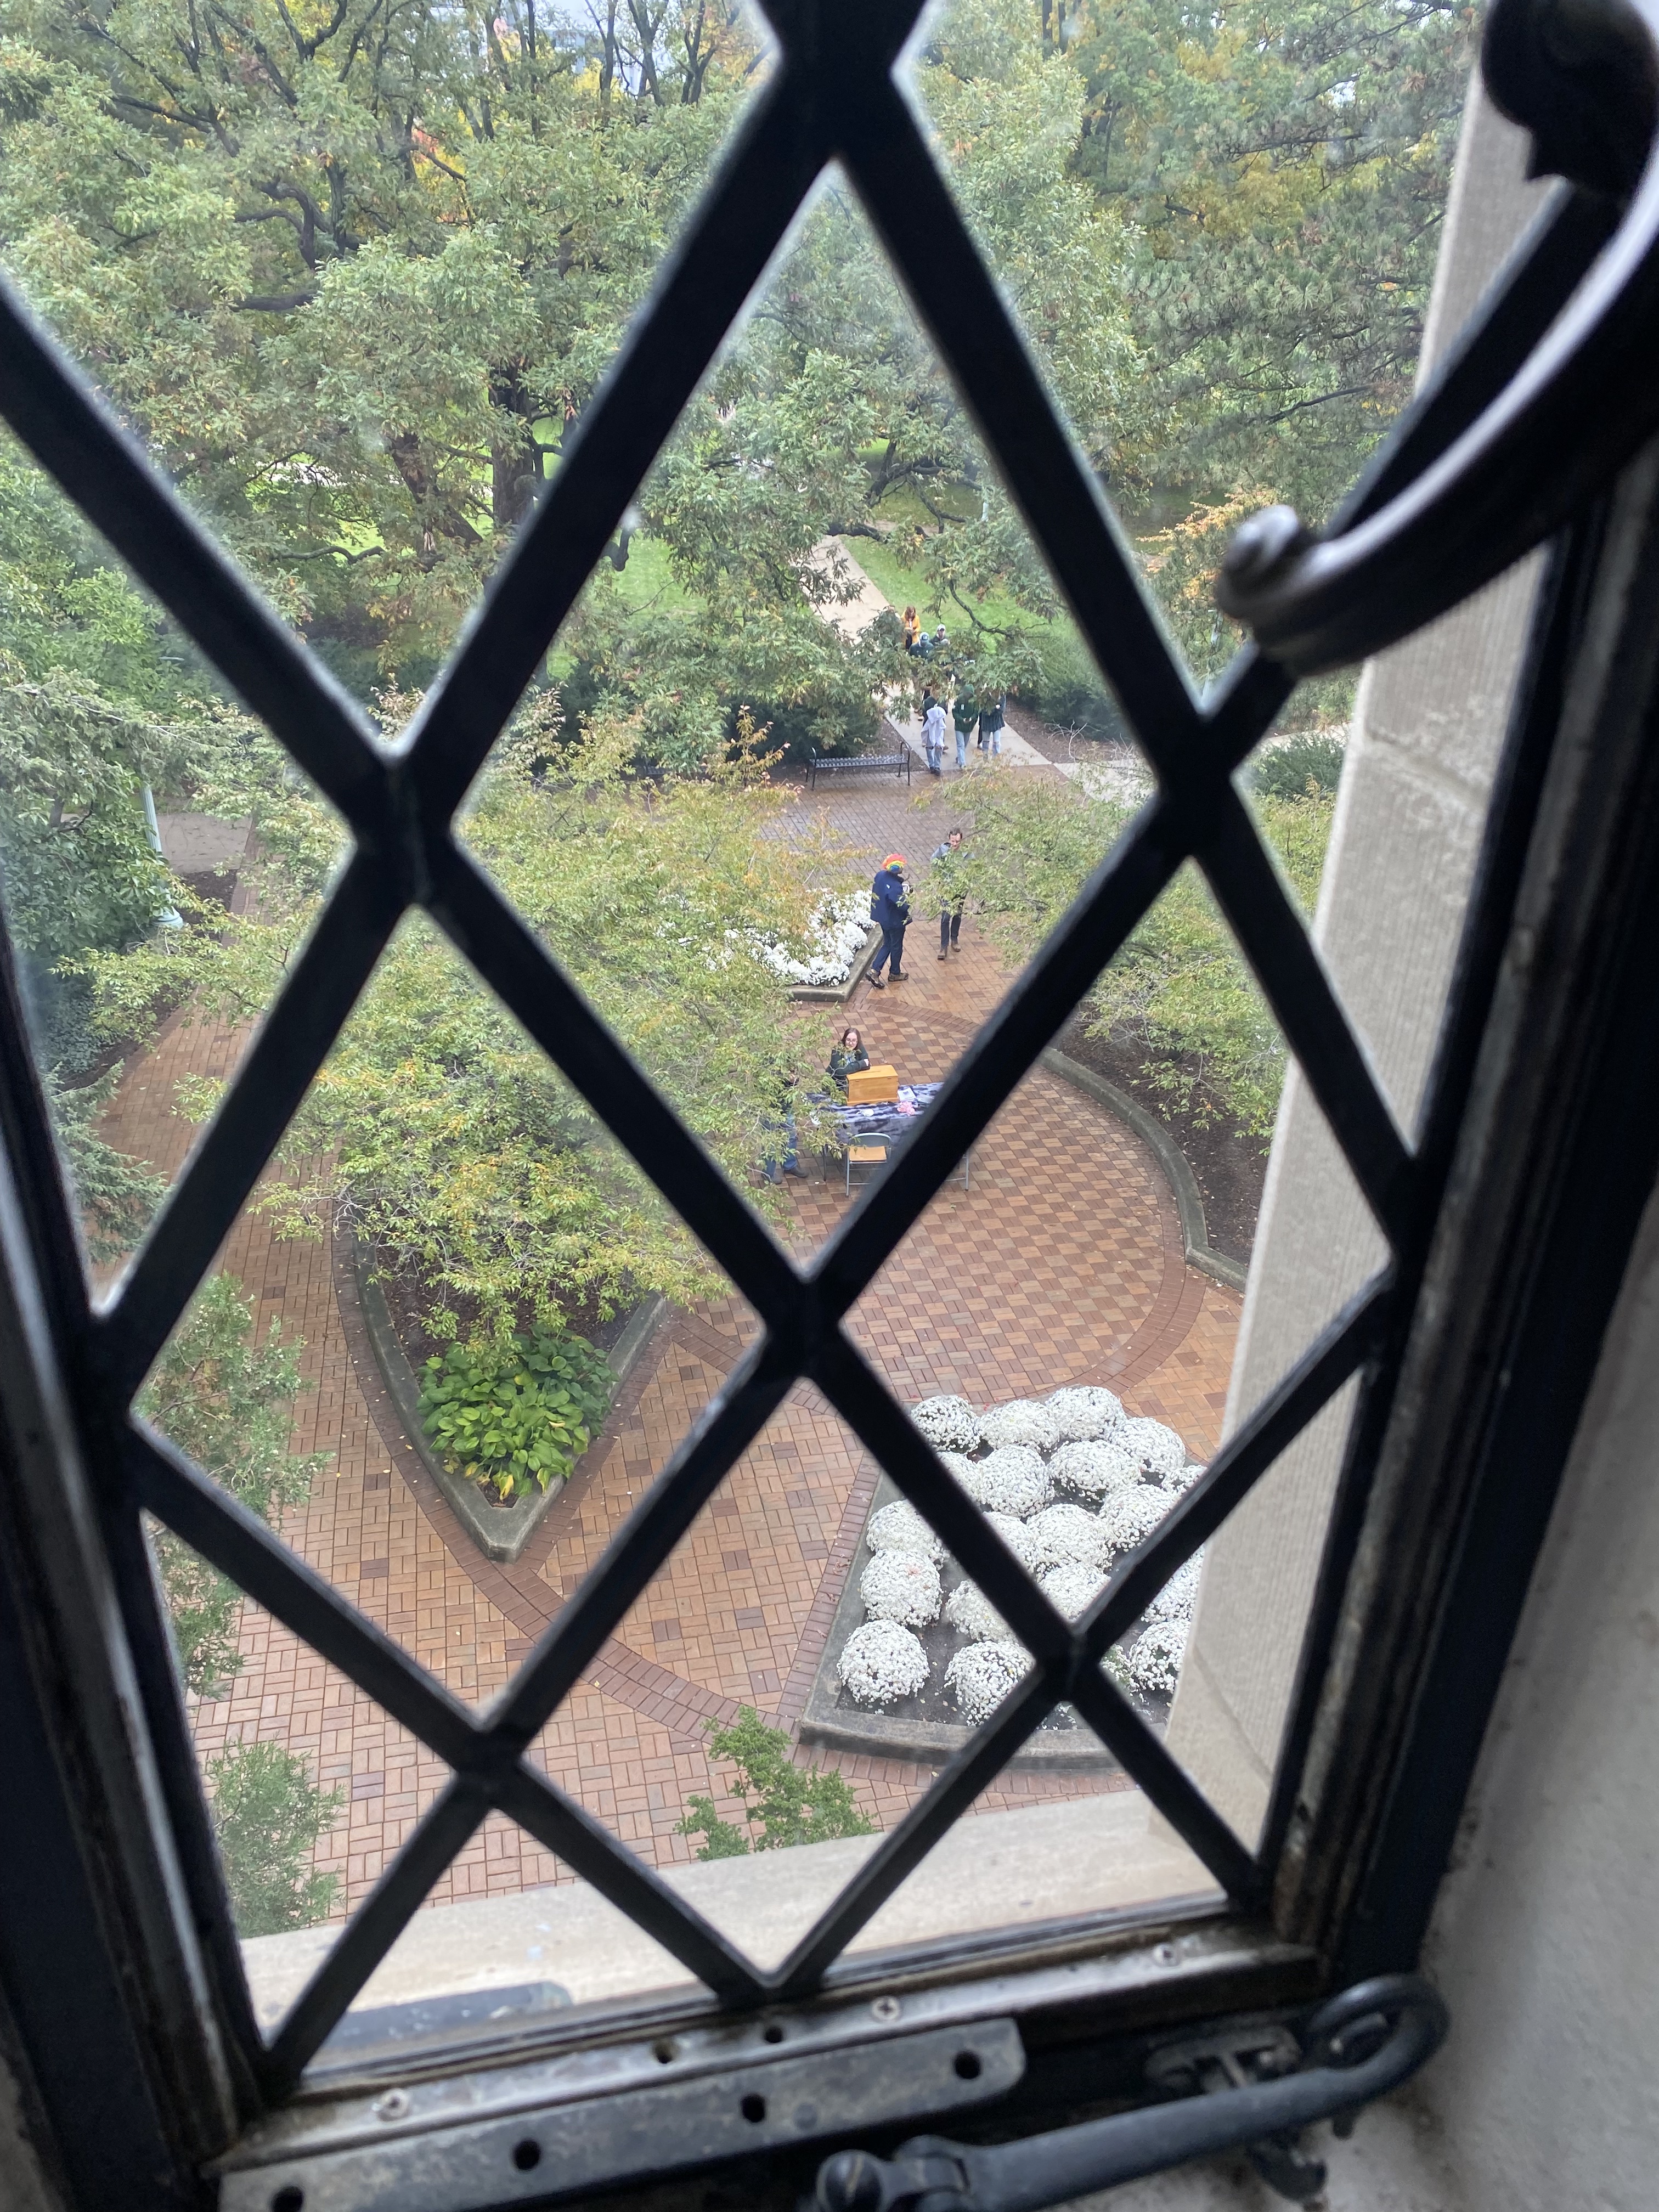 Image shows a view down through a window to a courtyard below